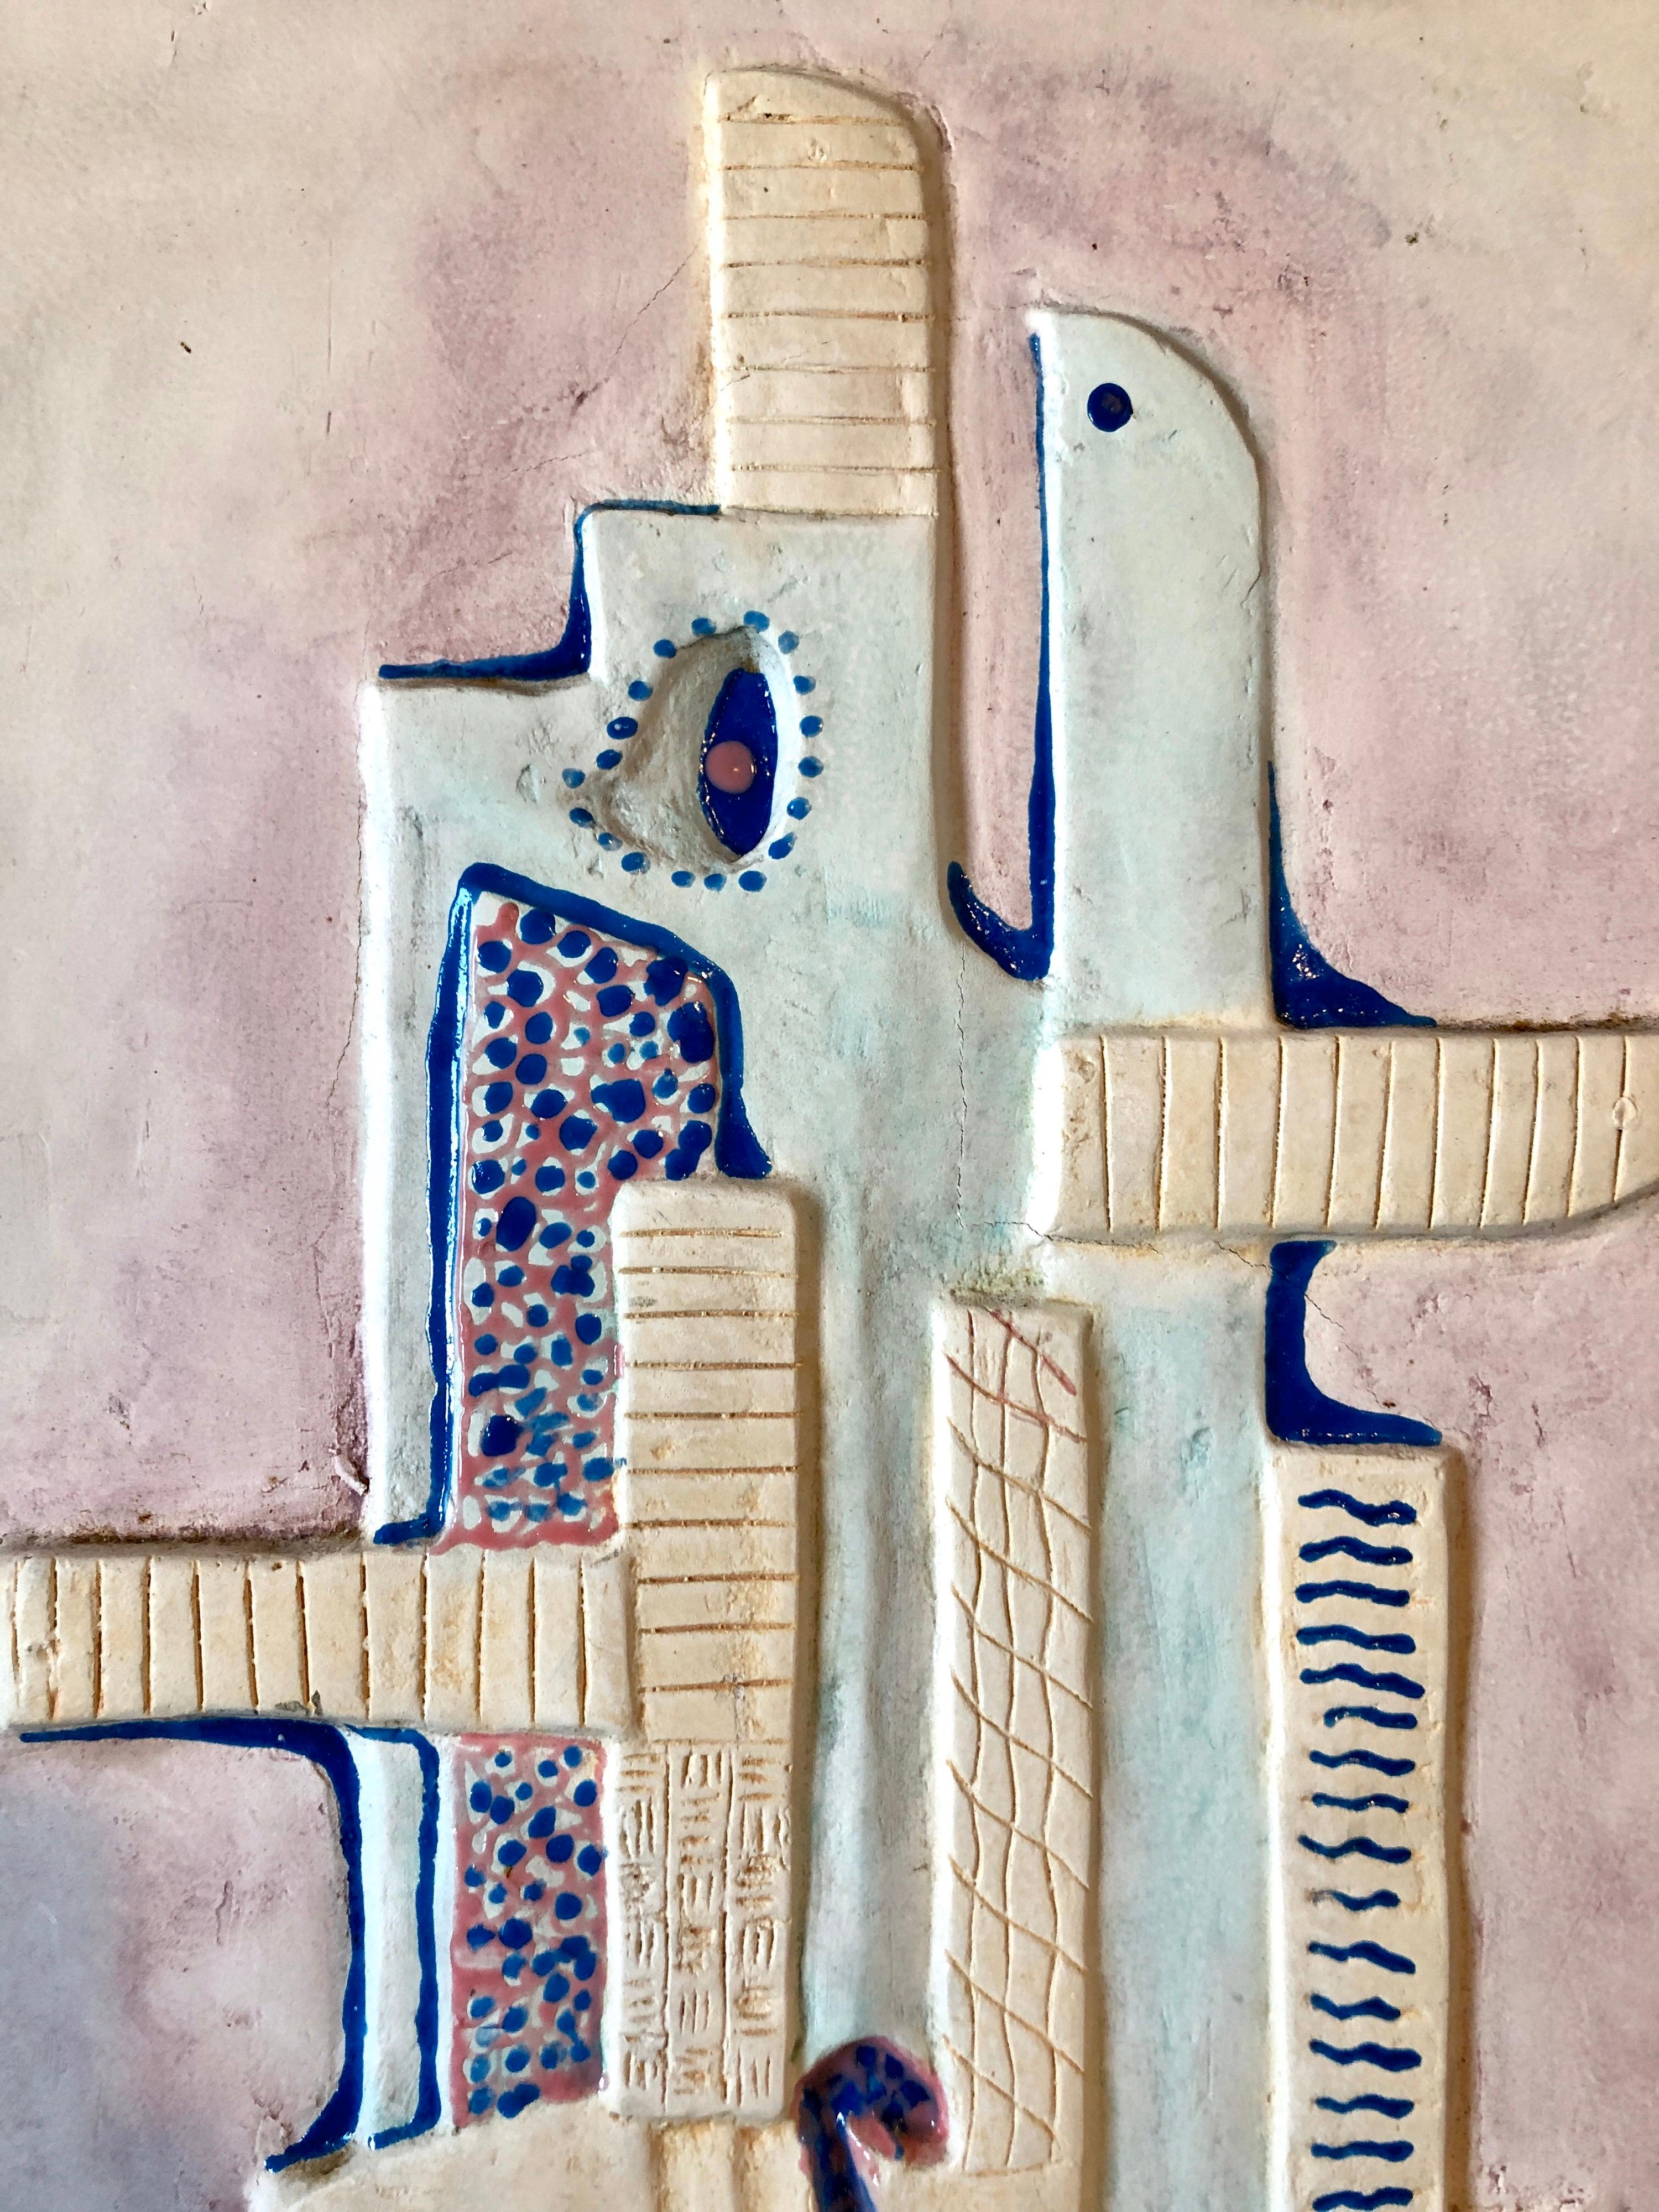 1949 Hungarian Cubism Wall Hanging Relief Sculpture with Enamel Painting Cubist  2